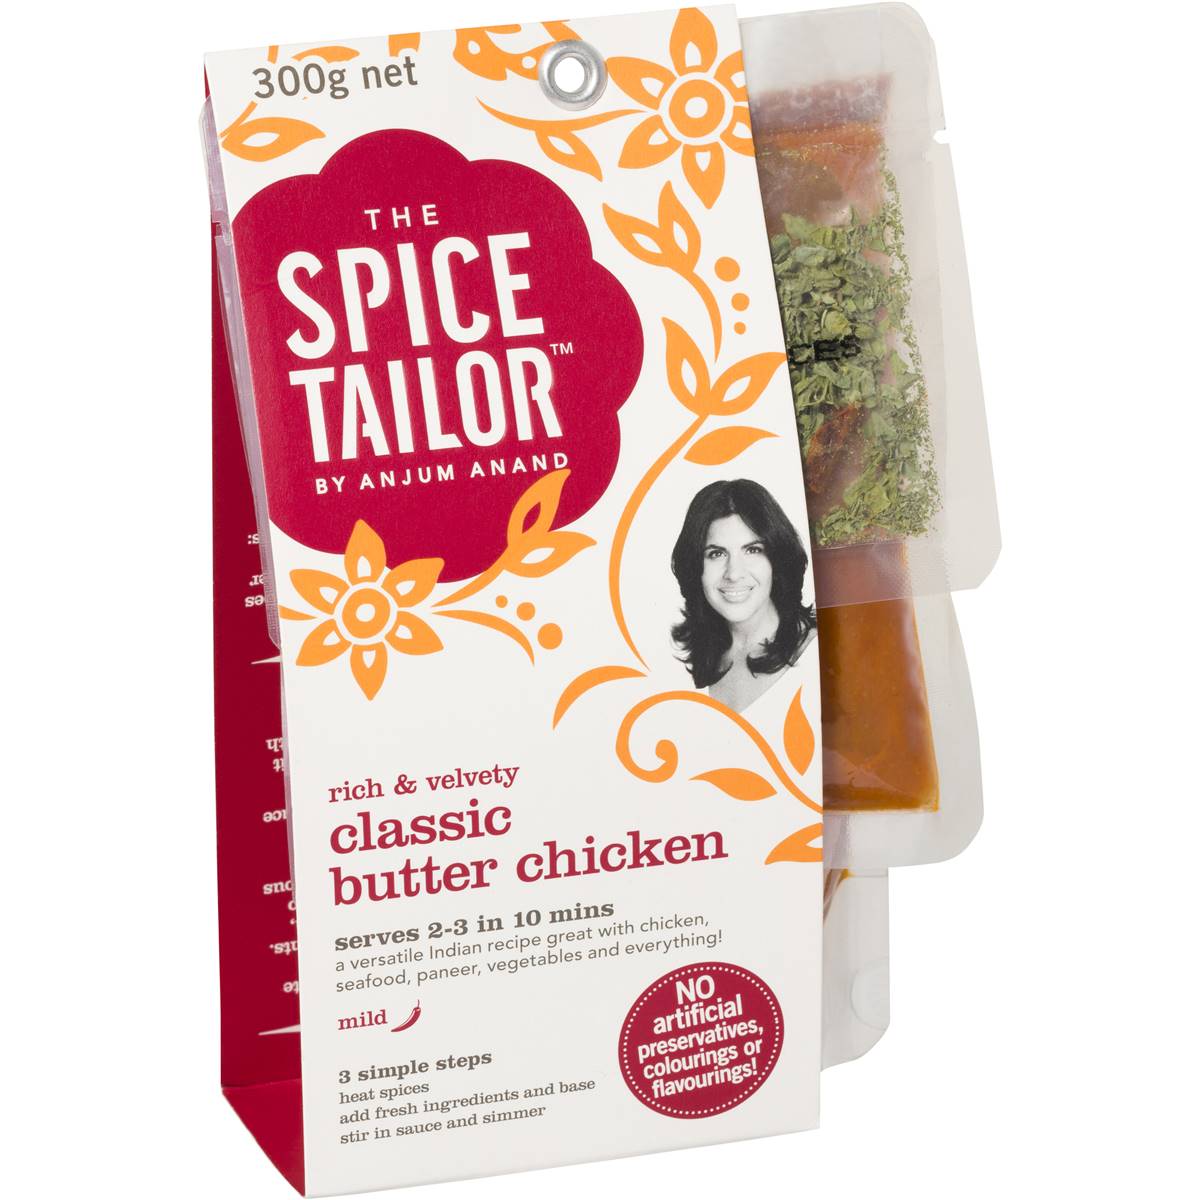 The Spice Tailor Classic Butter Chicken Kit 300g